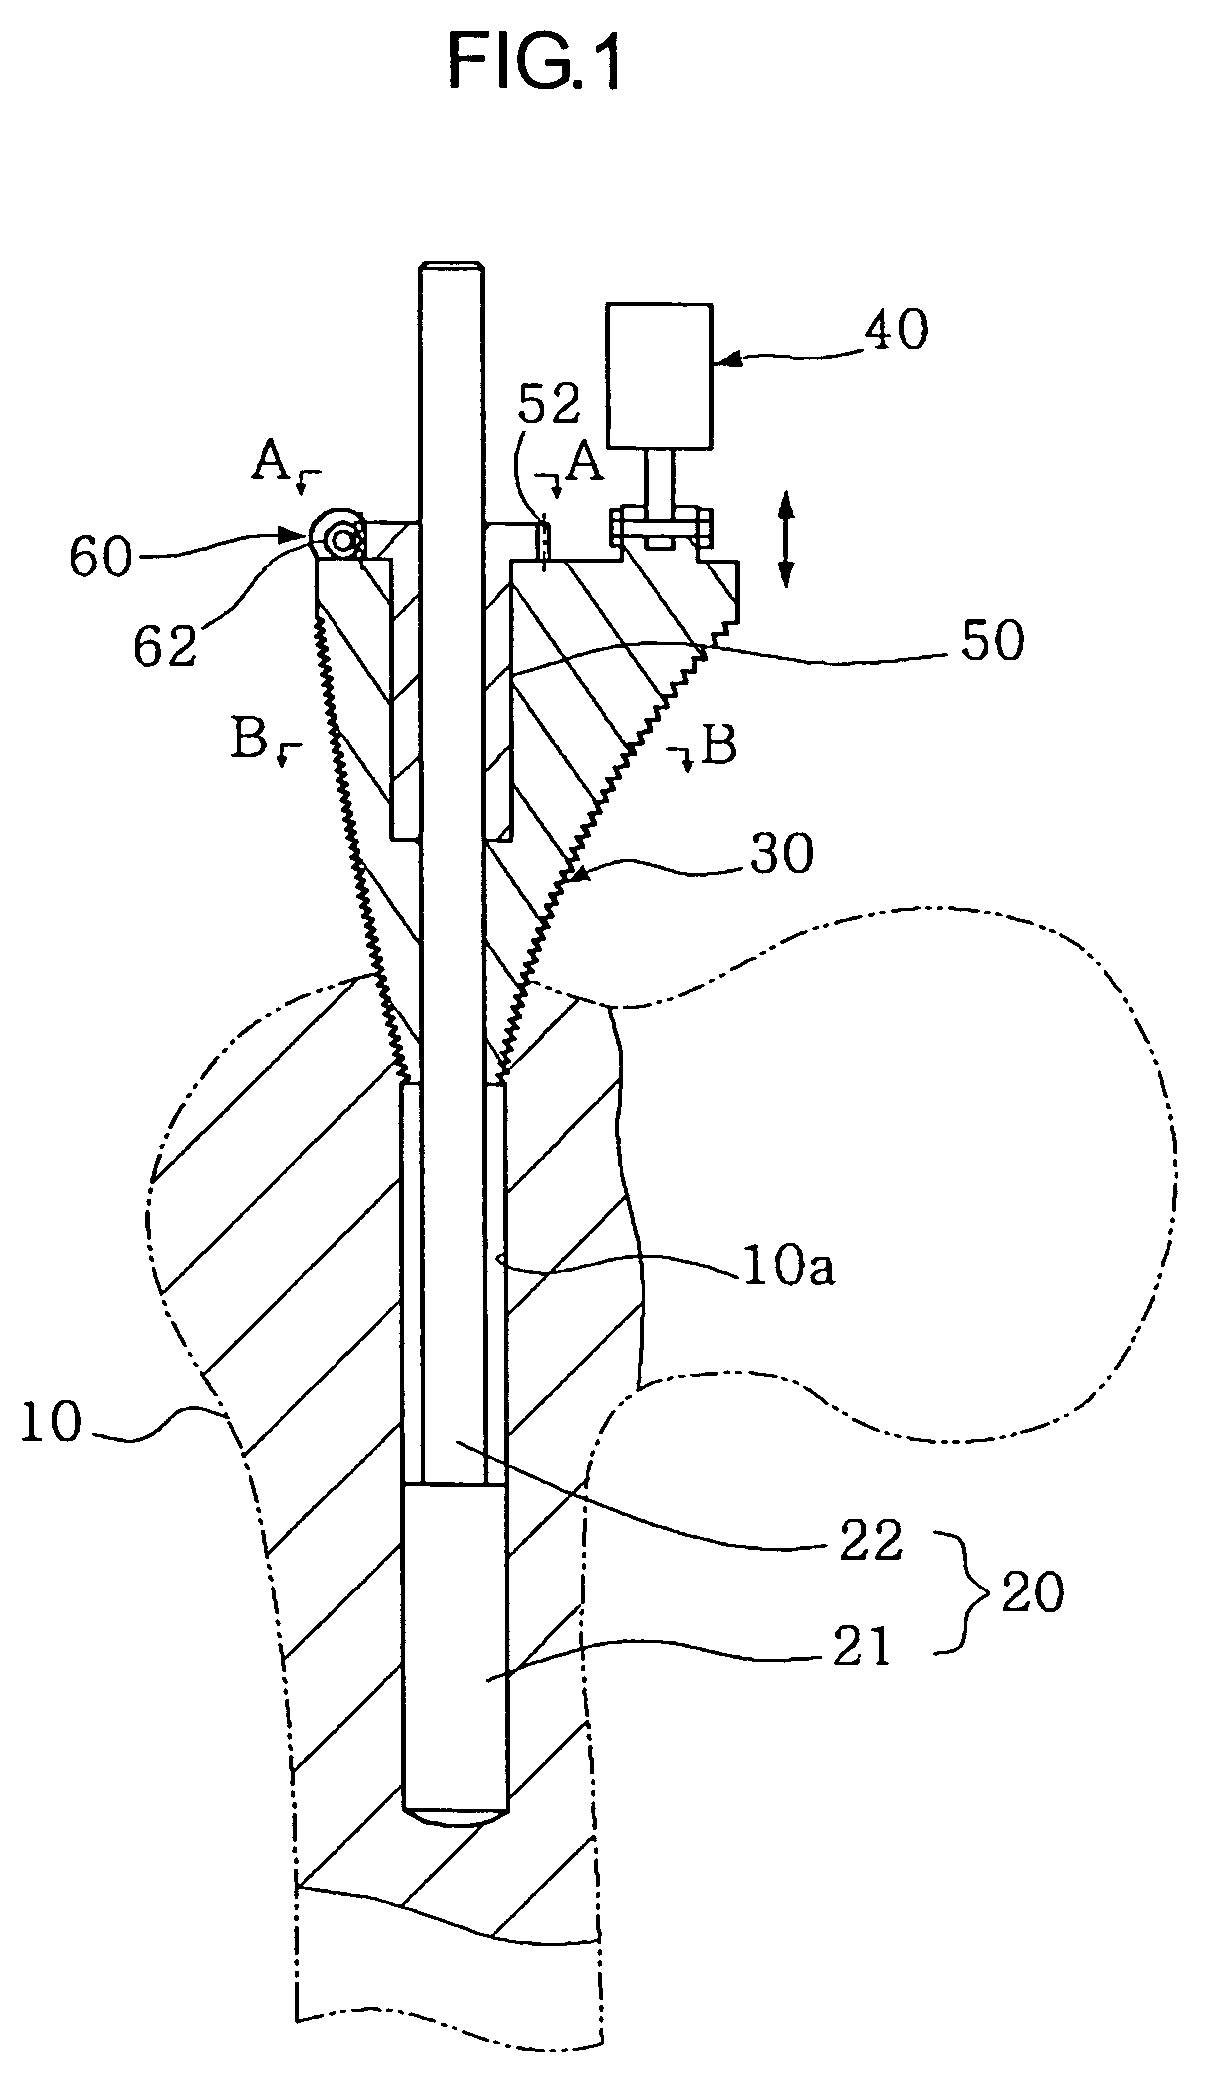 Apparatus for preparing femoral cavity using vibration under operation of fixing guide unit